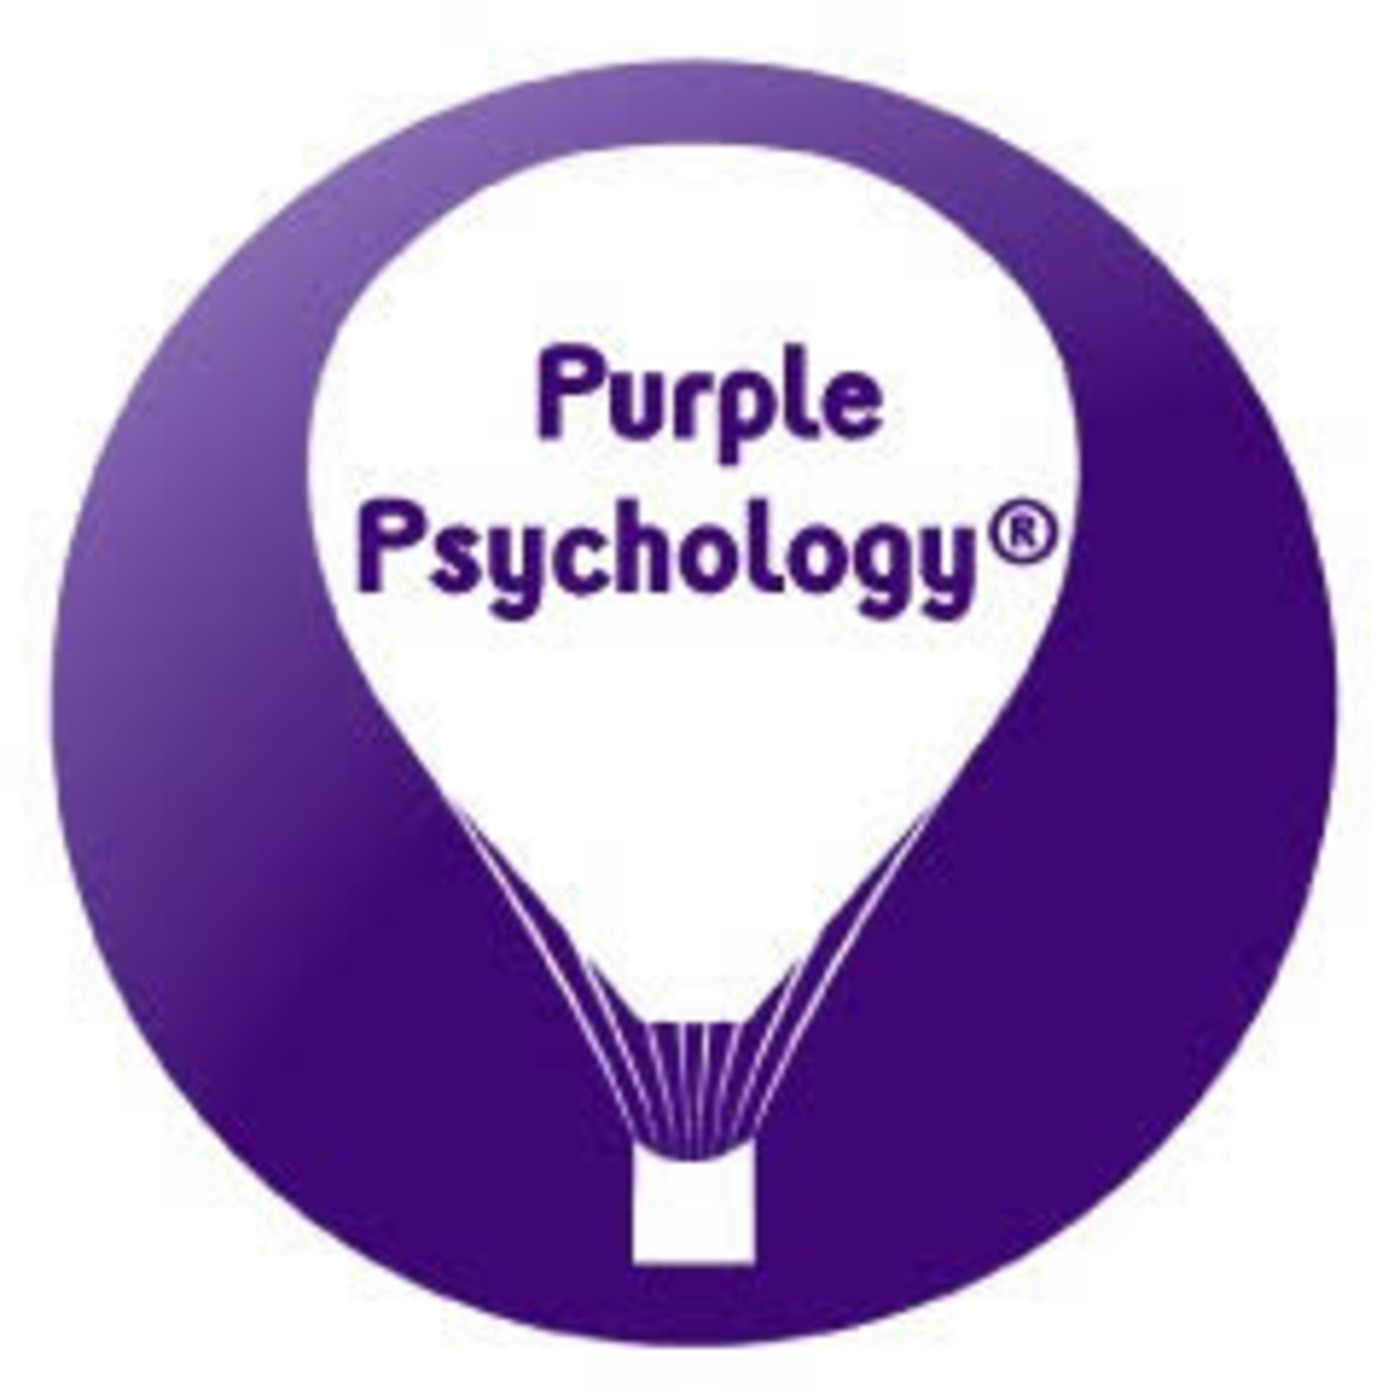 Episode 46 New Introduction to Purple Psychology Podcast